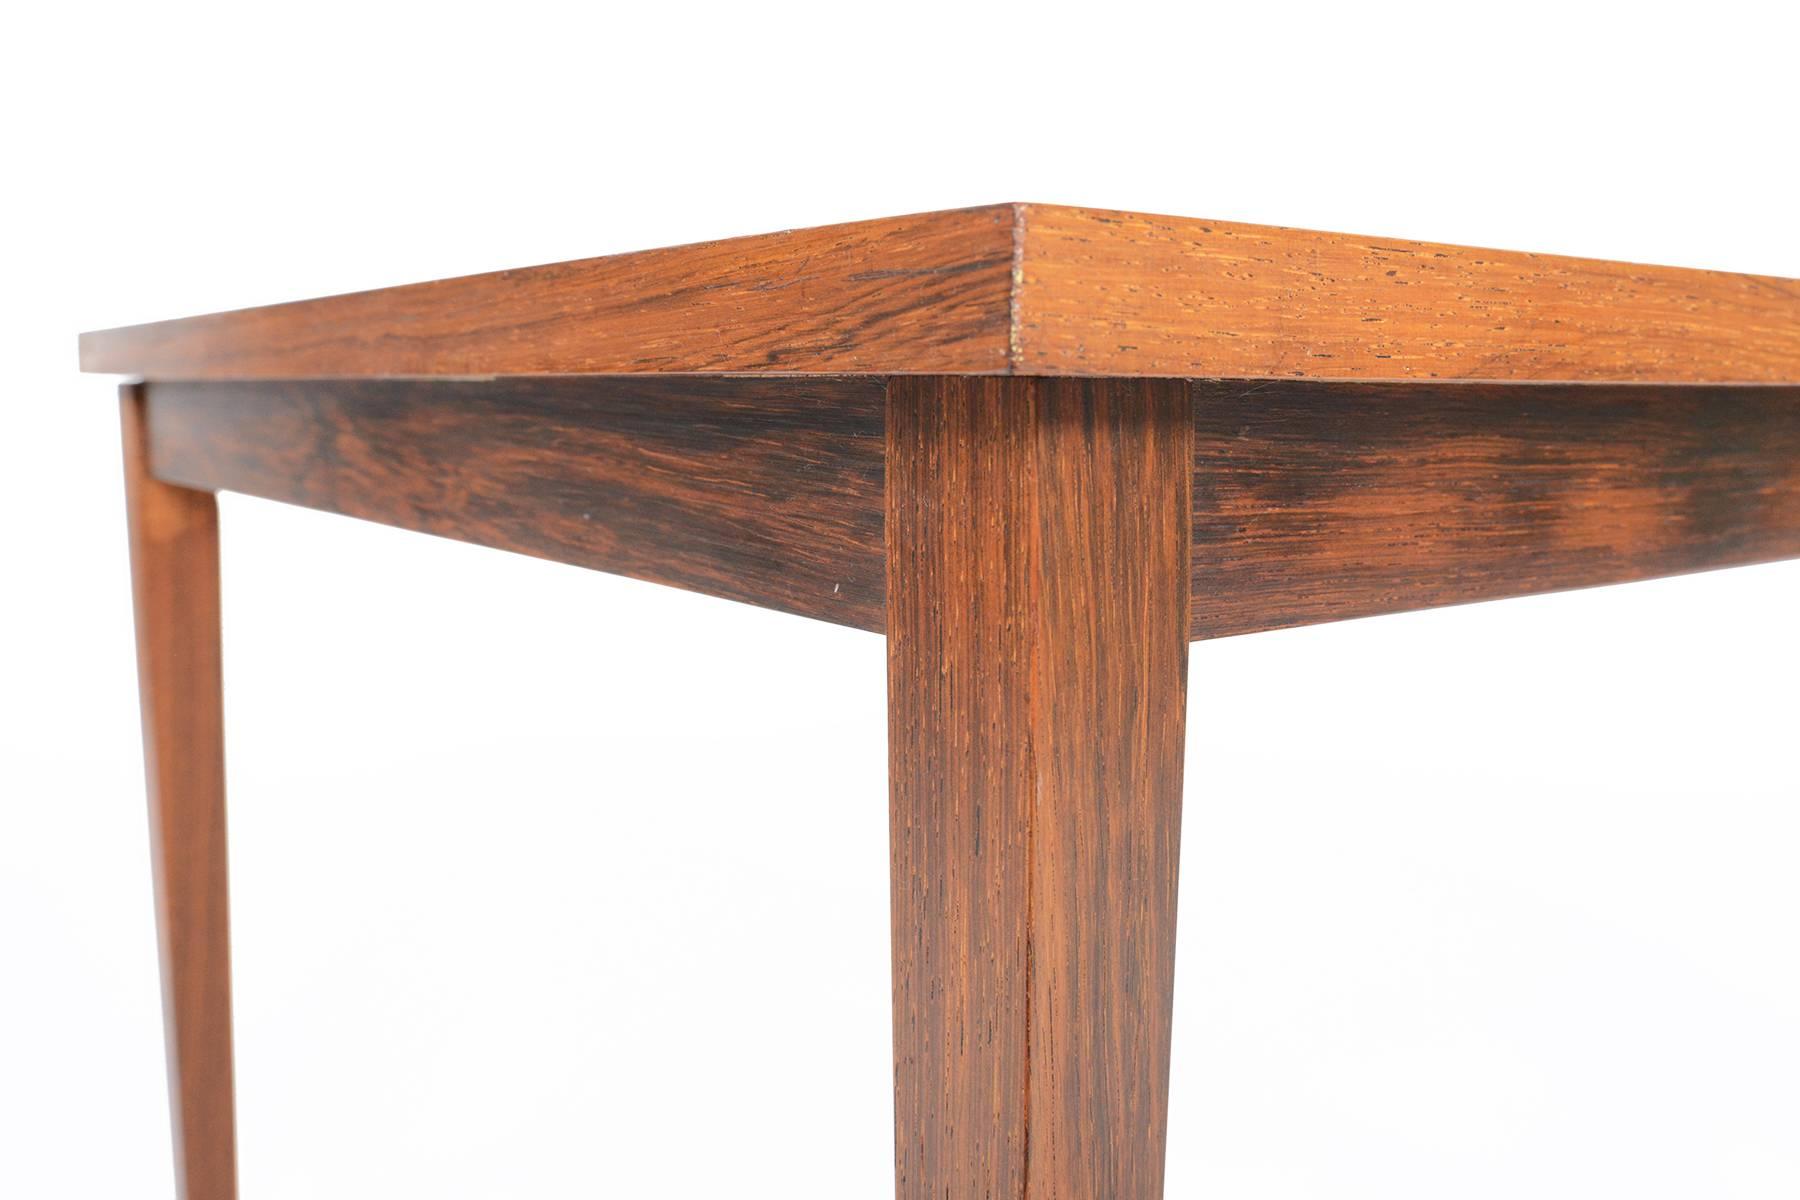 Mid-20th Century Danish Modern Slatted Square Rosewood Coffee Table